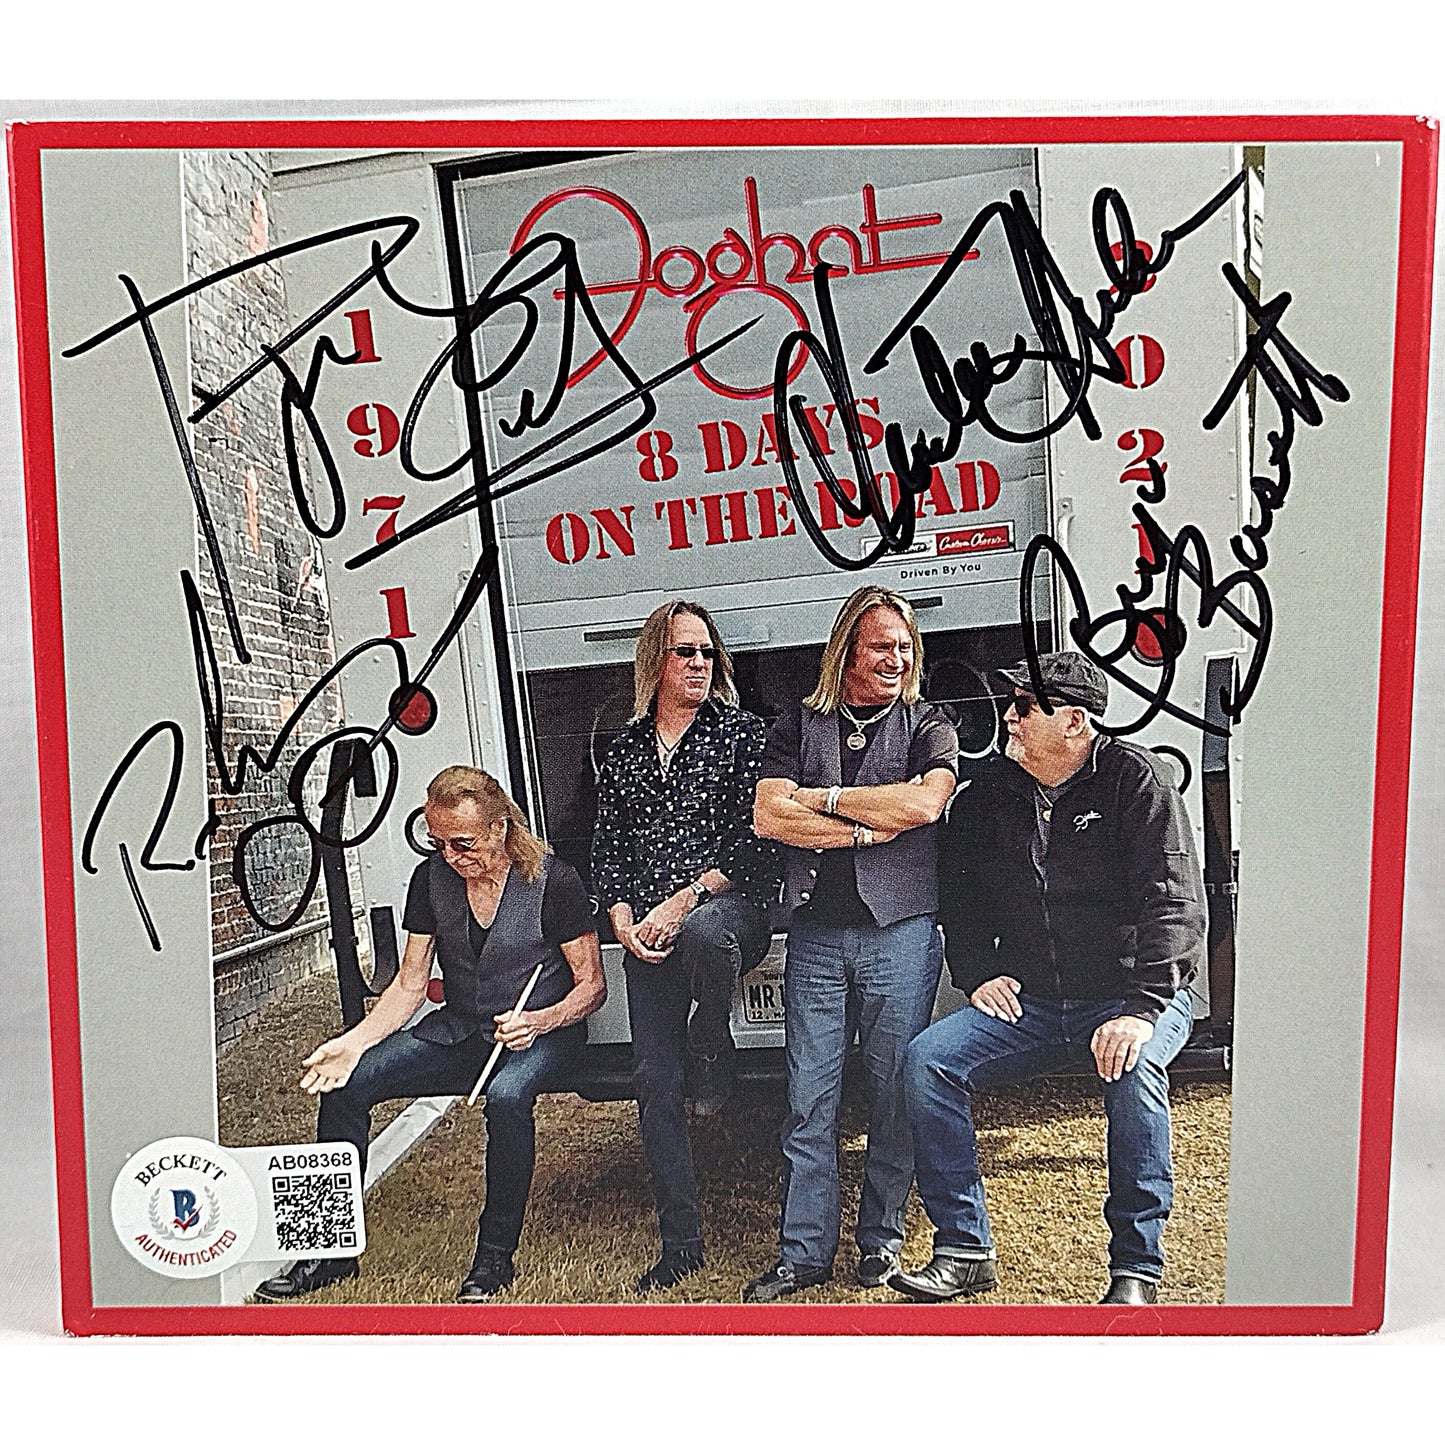 Music- Autographed- Foghat Signed 8 Days On The Road Compact Disc CD Cover Beckett Authentication 102